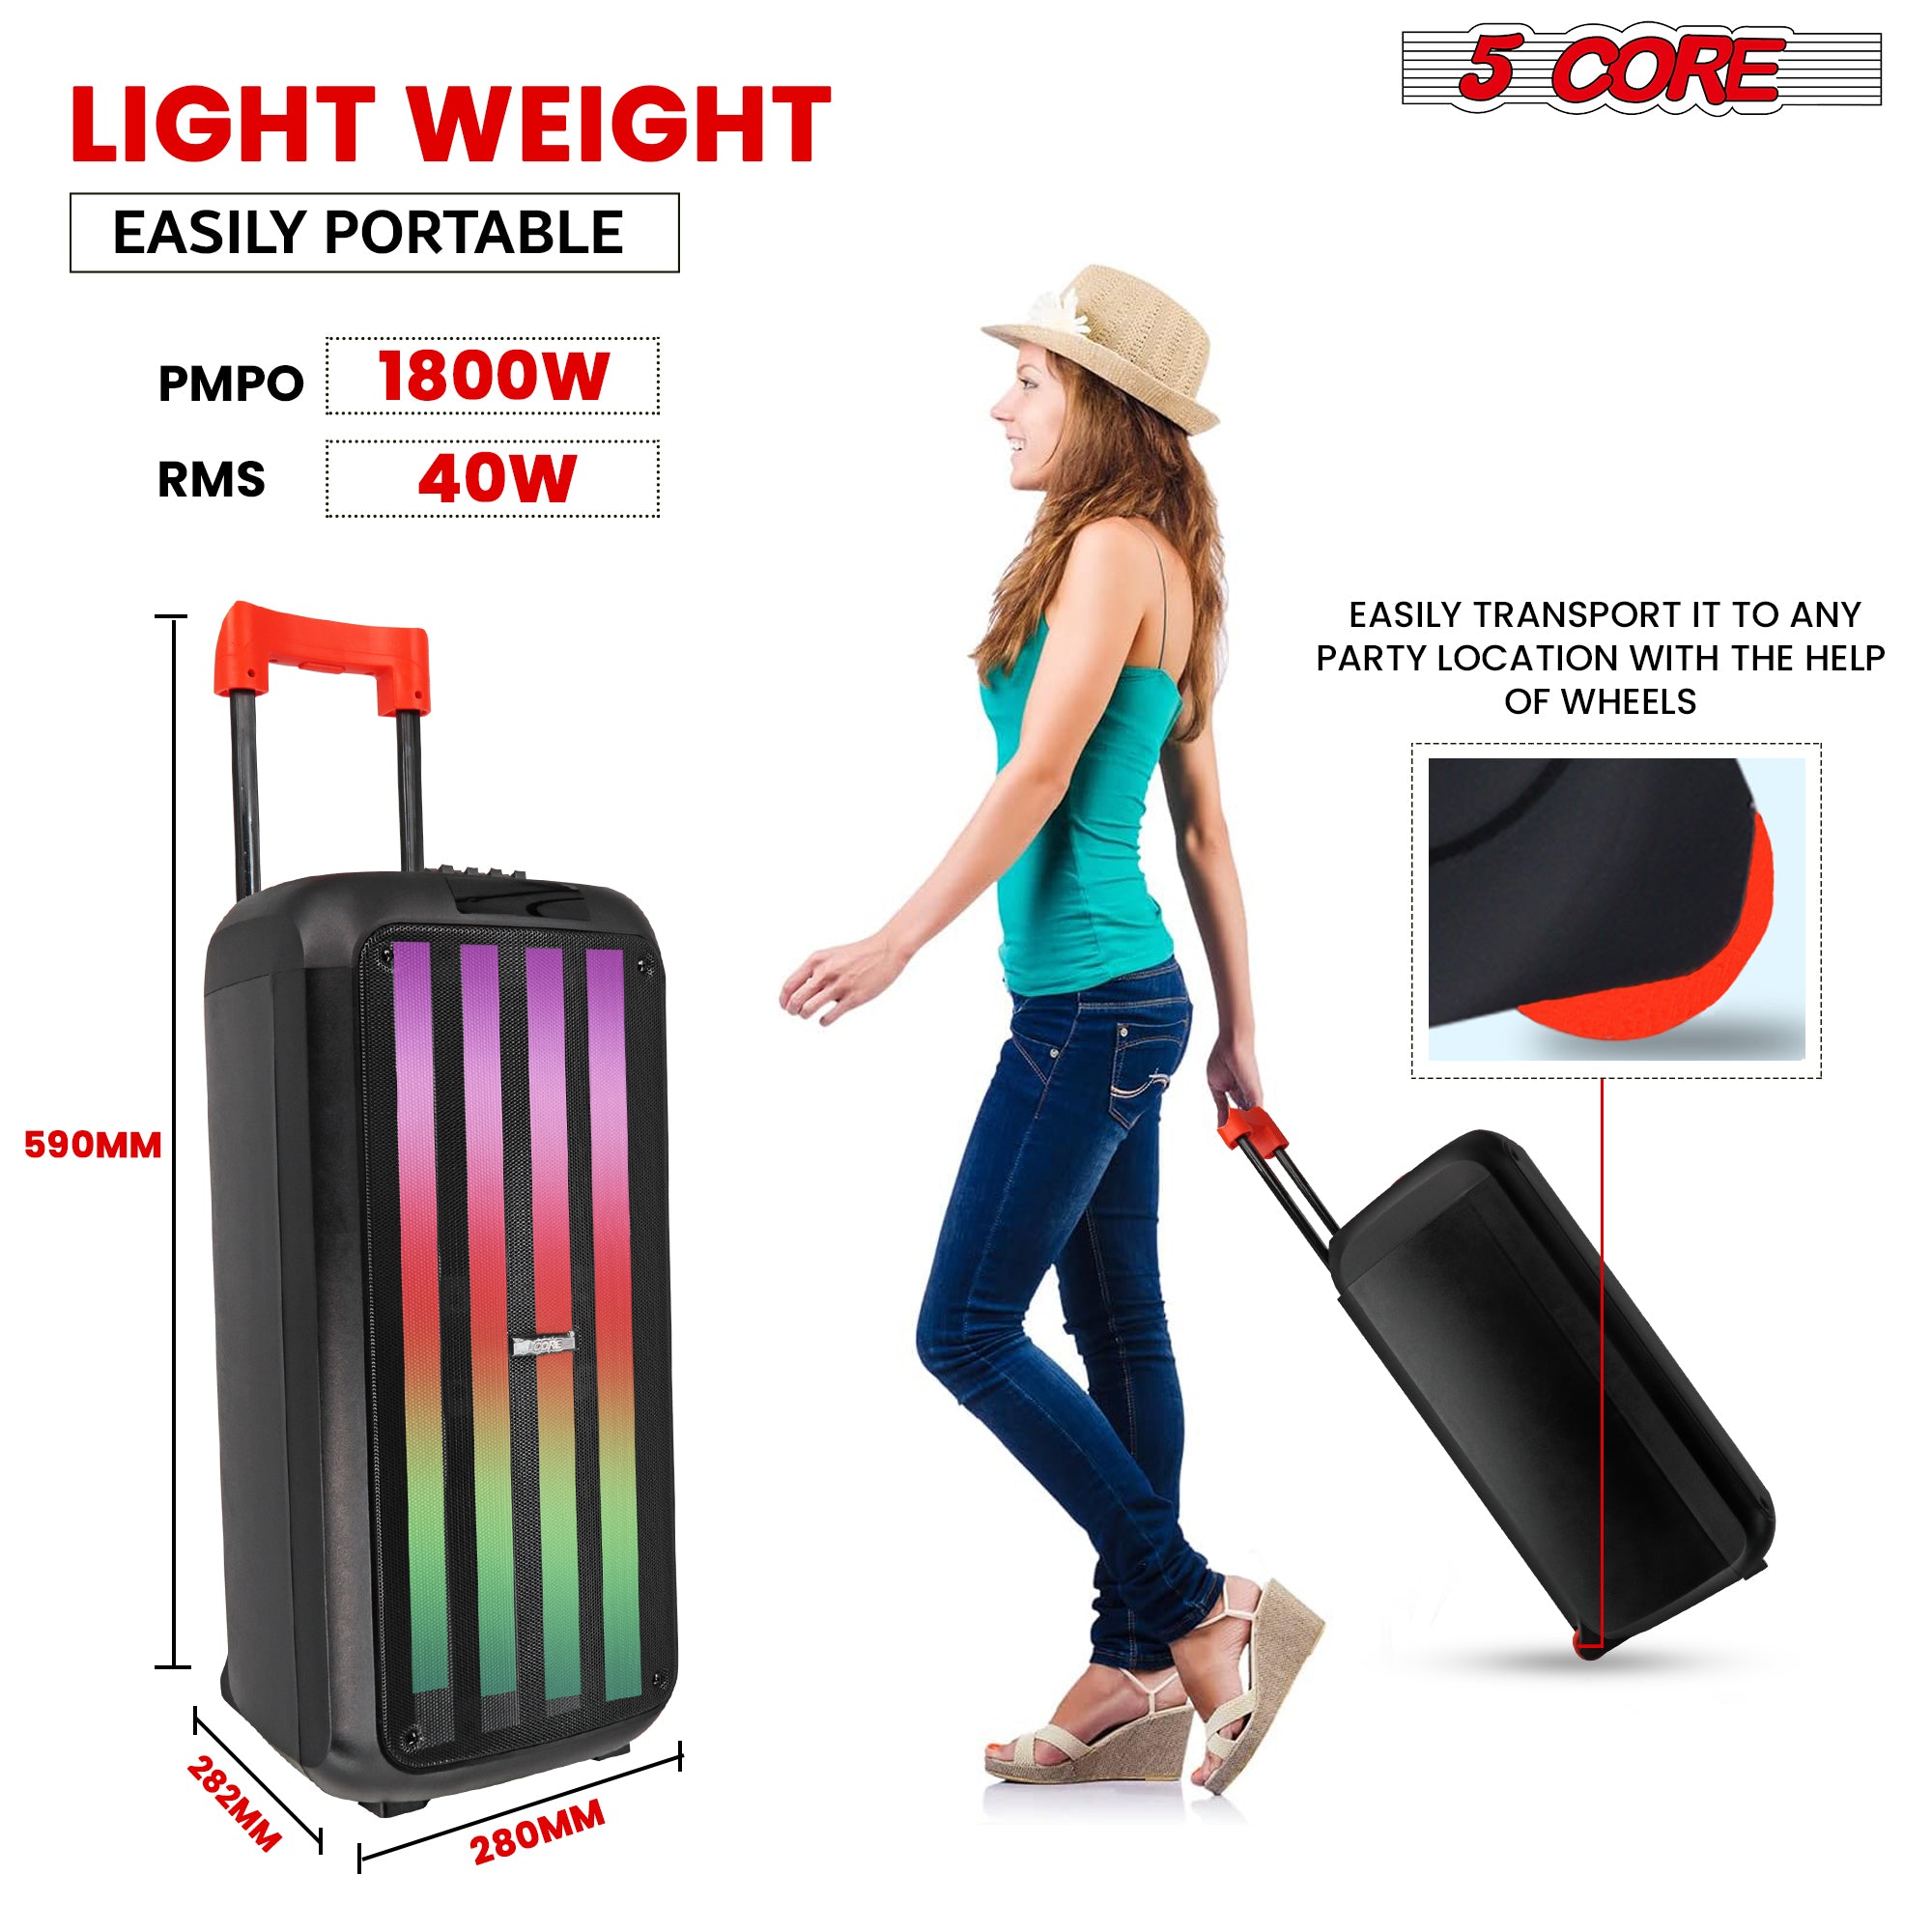 light weight easily portable party speaker